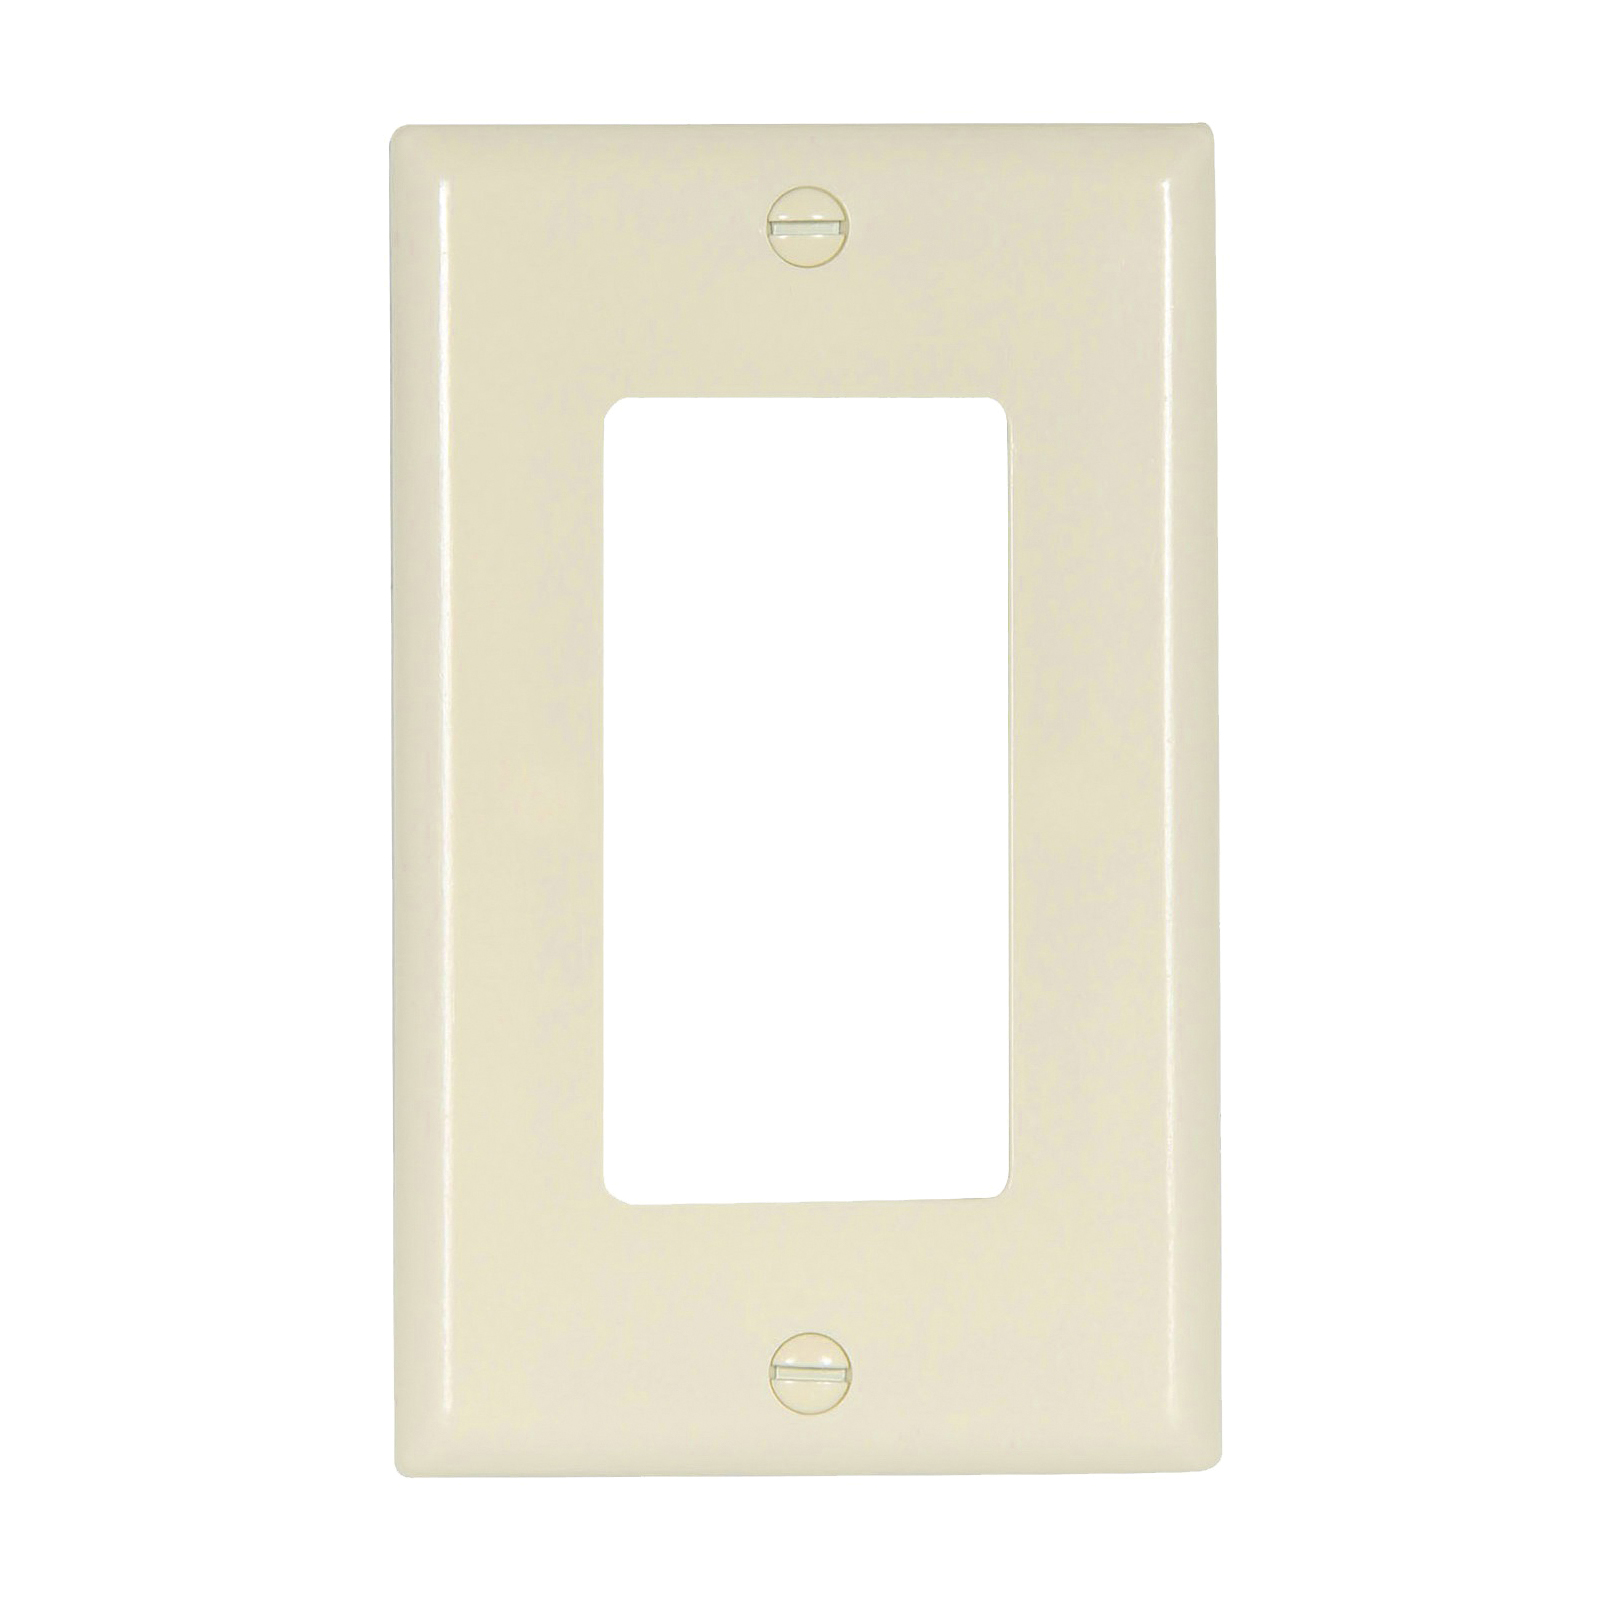 2151LA-BOX Wallplate, 4-1/2 in L, 2-3/4 in W, 1 -Gang, Thermoset, Light Almond, High-Gloss